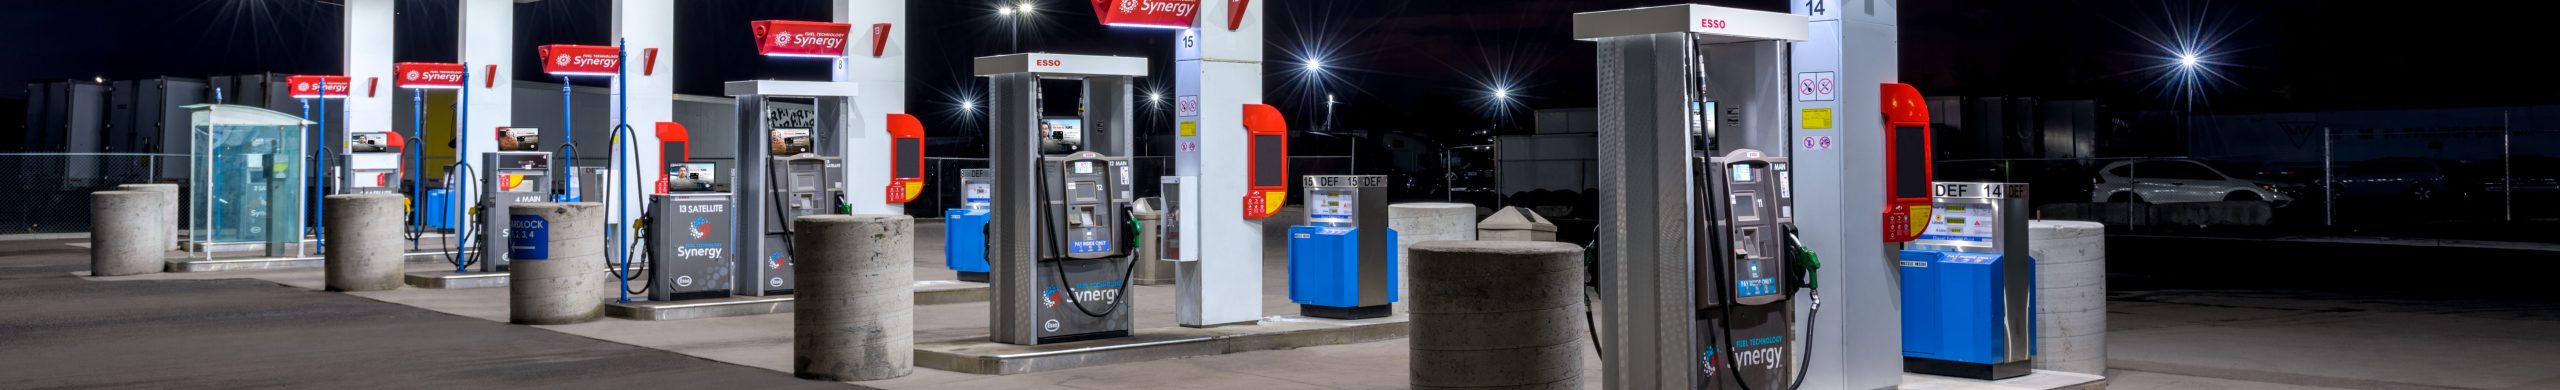 Photo of fuel dispensers beneath an Esso cardlock canopy at night